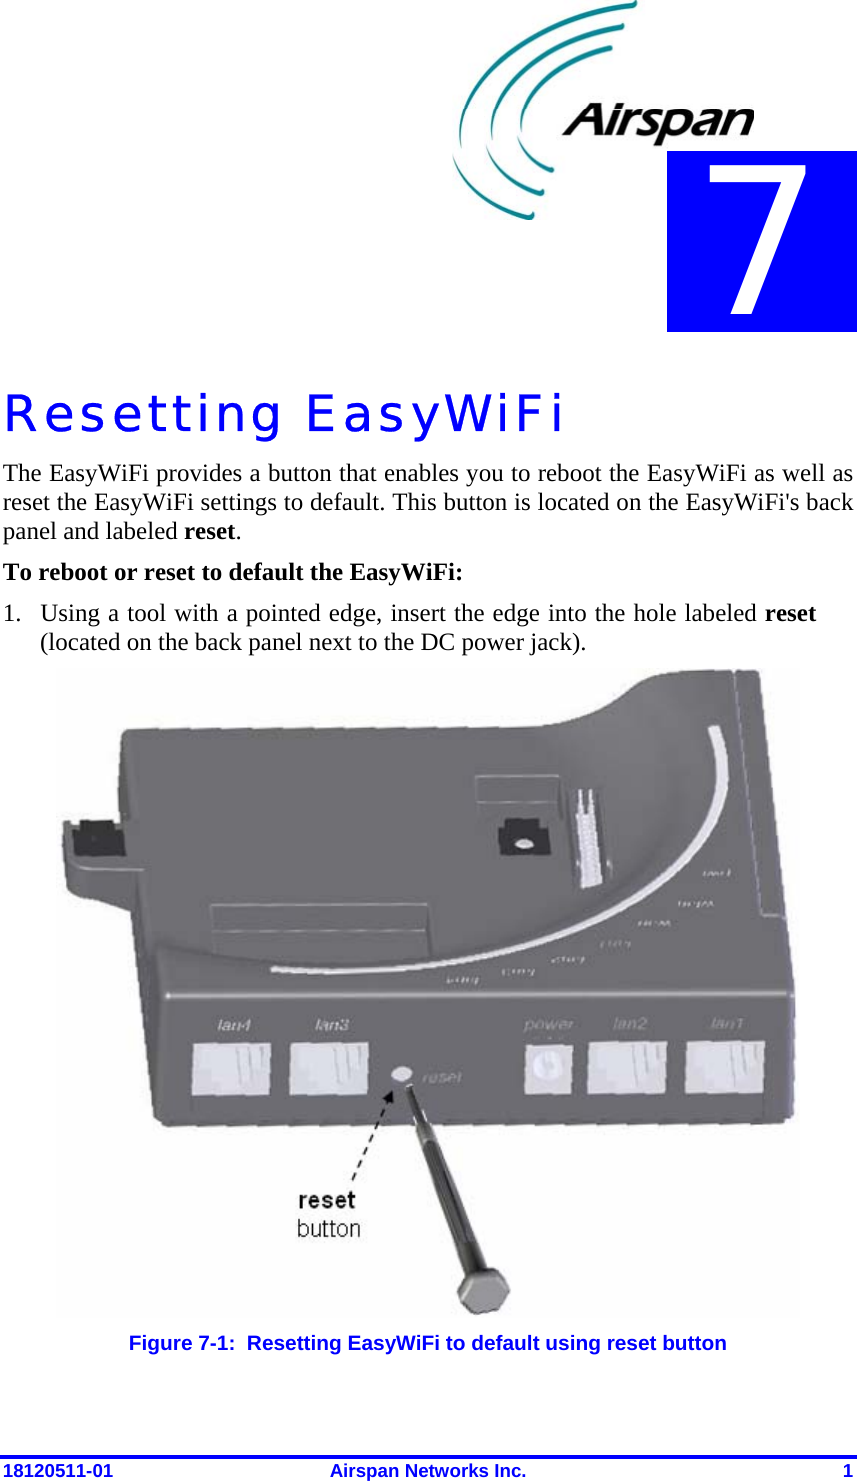  18120511-01  Airspan Networks Inc.  1 Resetting EasyWiFi The EasyWiFi provides a button that enables you to reboot the EasyWiFi as well as reset the EasyWiFi settings to default. This button is located on the EasyWiFi&apos;s back panel and labeled reset. To reboot or reset to default the EasyWiFi: 1. Using a tool with a pointed edge, insert the edge into the hole labeled reset (located on the back panel next to the DC power jack).  Figure  7-1:  Resetting EasyWiFi to default using reset button 7 